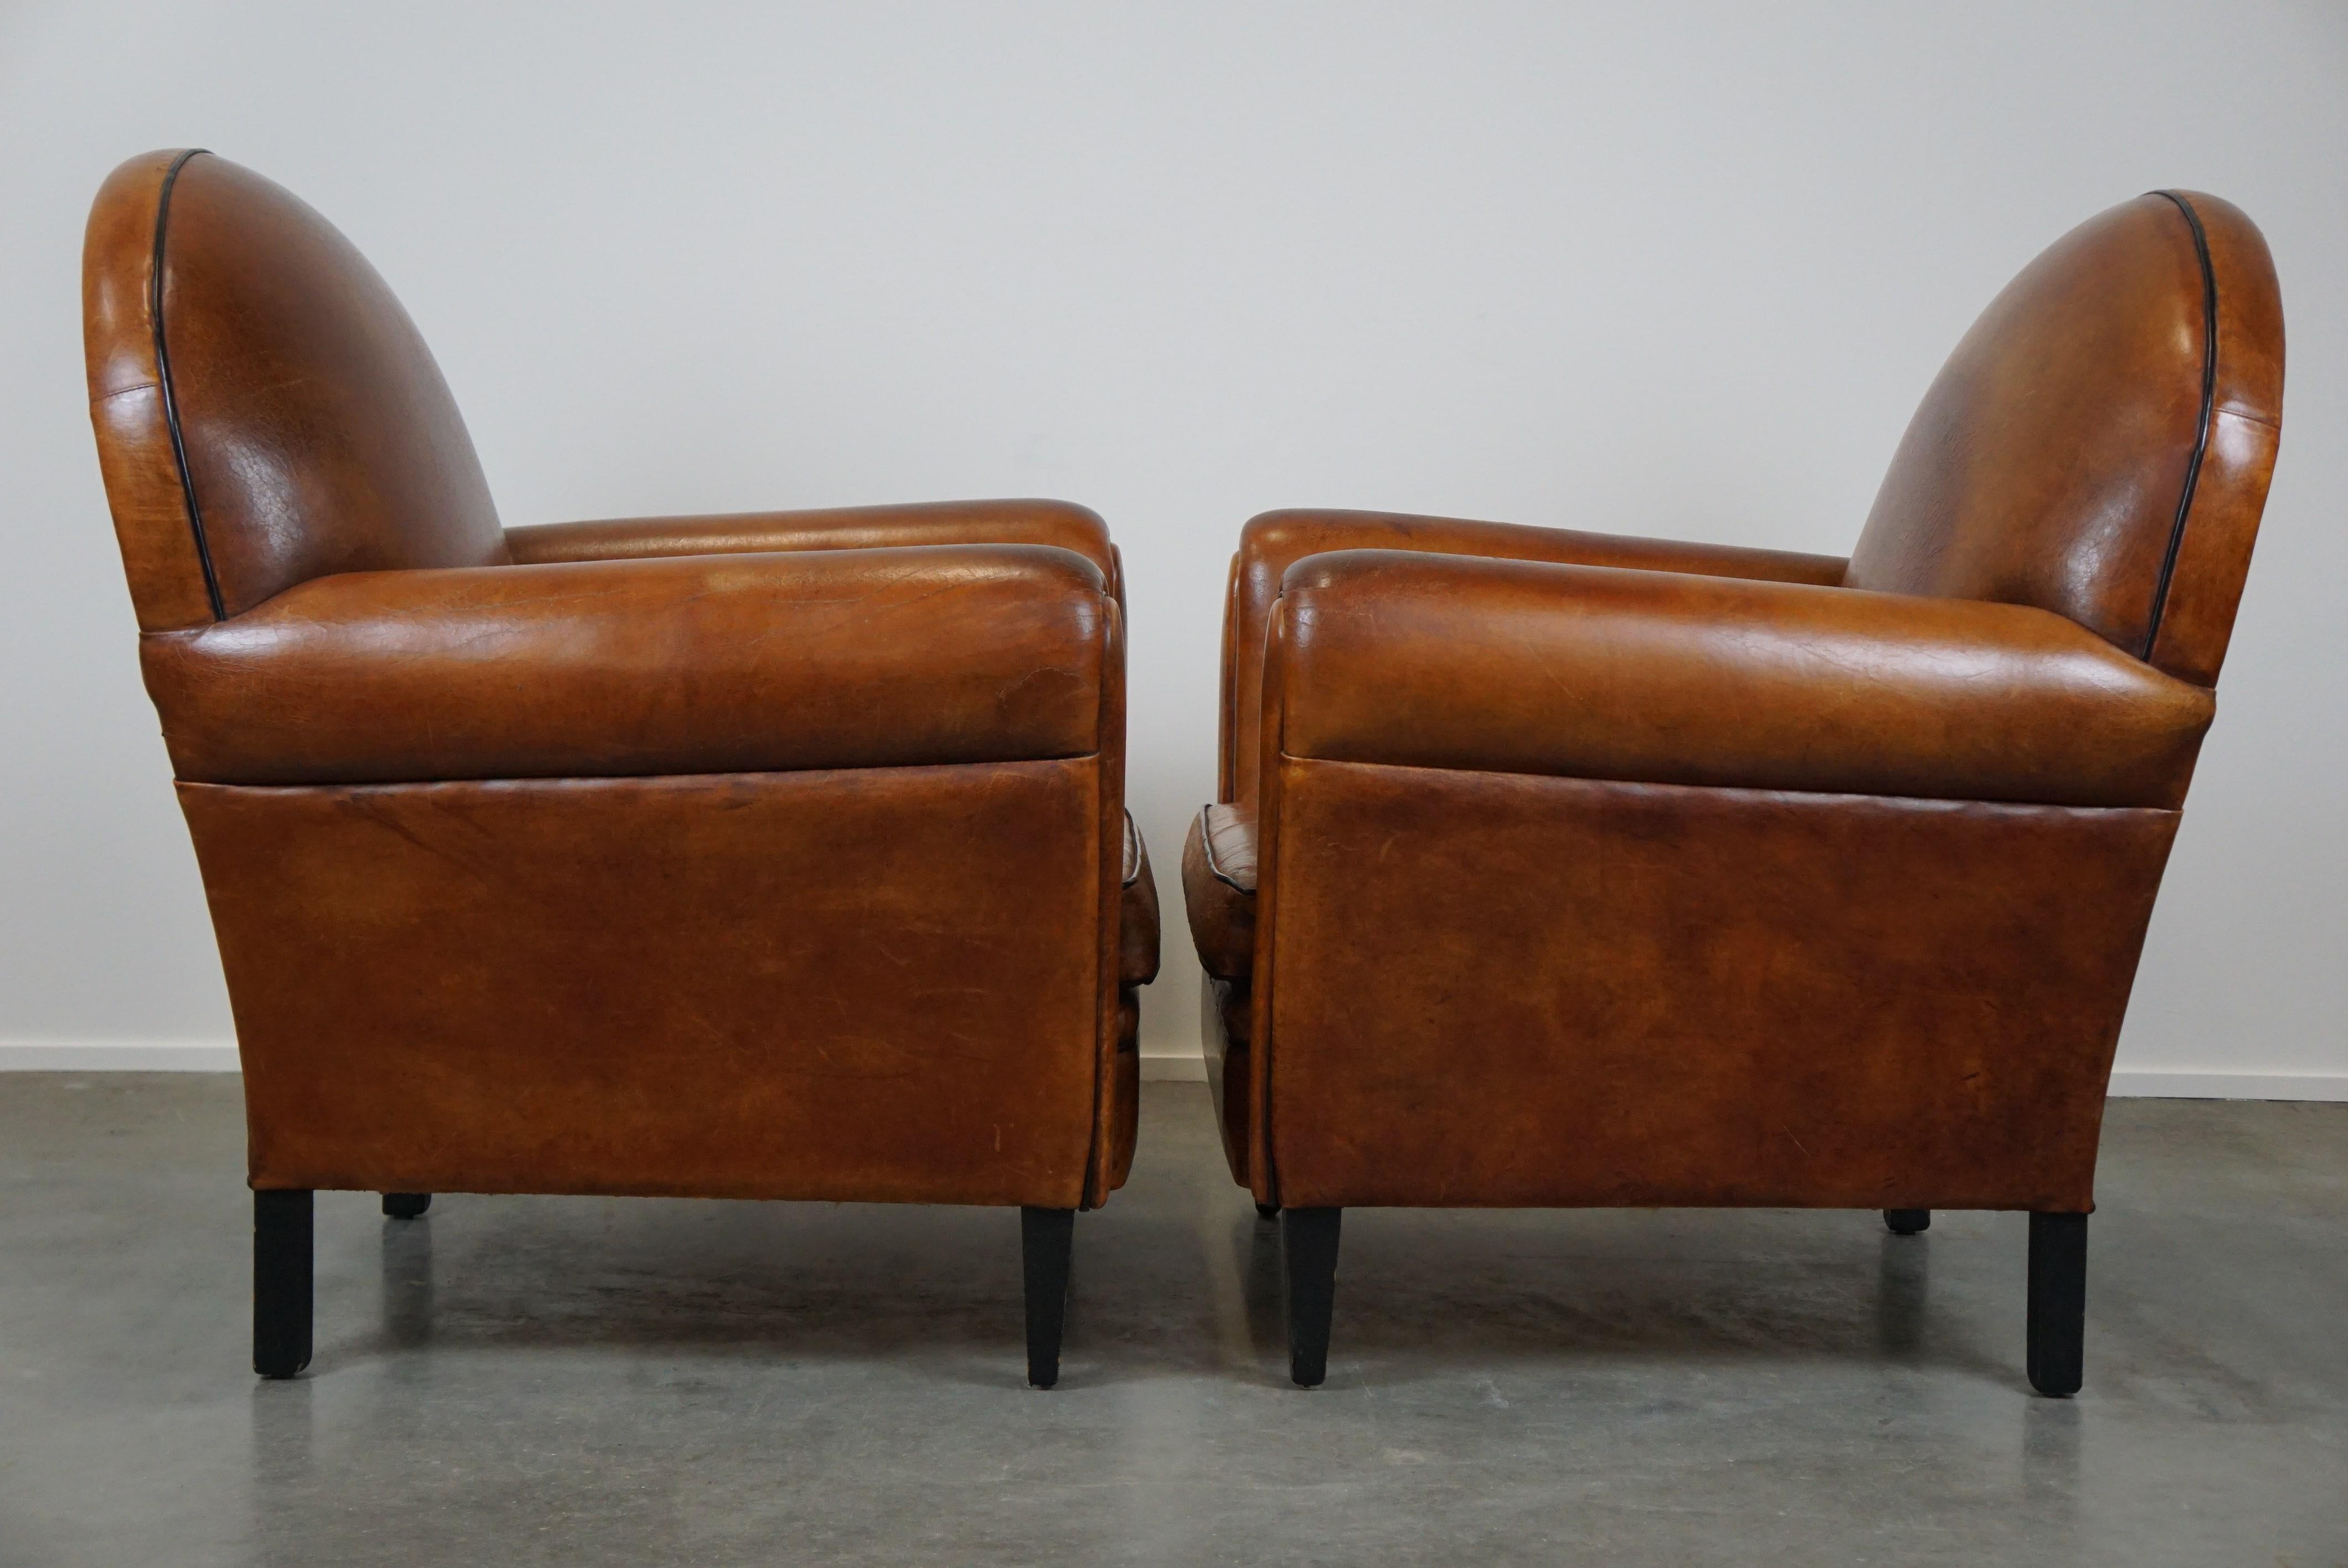 Offered by ByThijs, this delightful set of two sheep leather Art Deco style design armchairs with a beautiful patina and a positively used appearance. These armchairs don't hide the fact that they've lived a life; they proudly wear their life